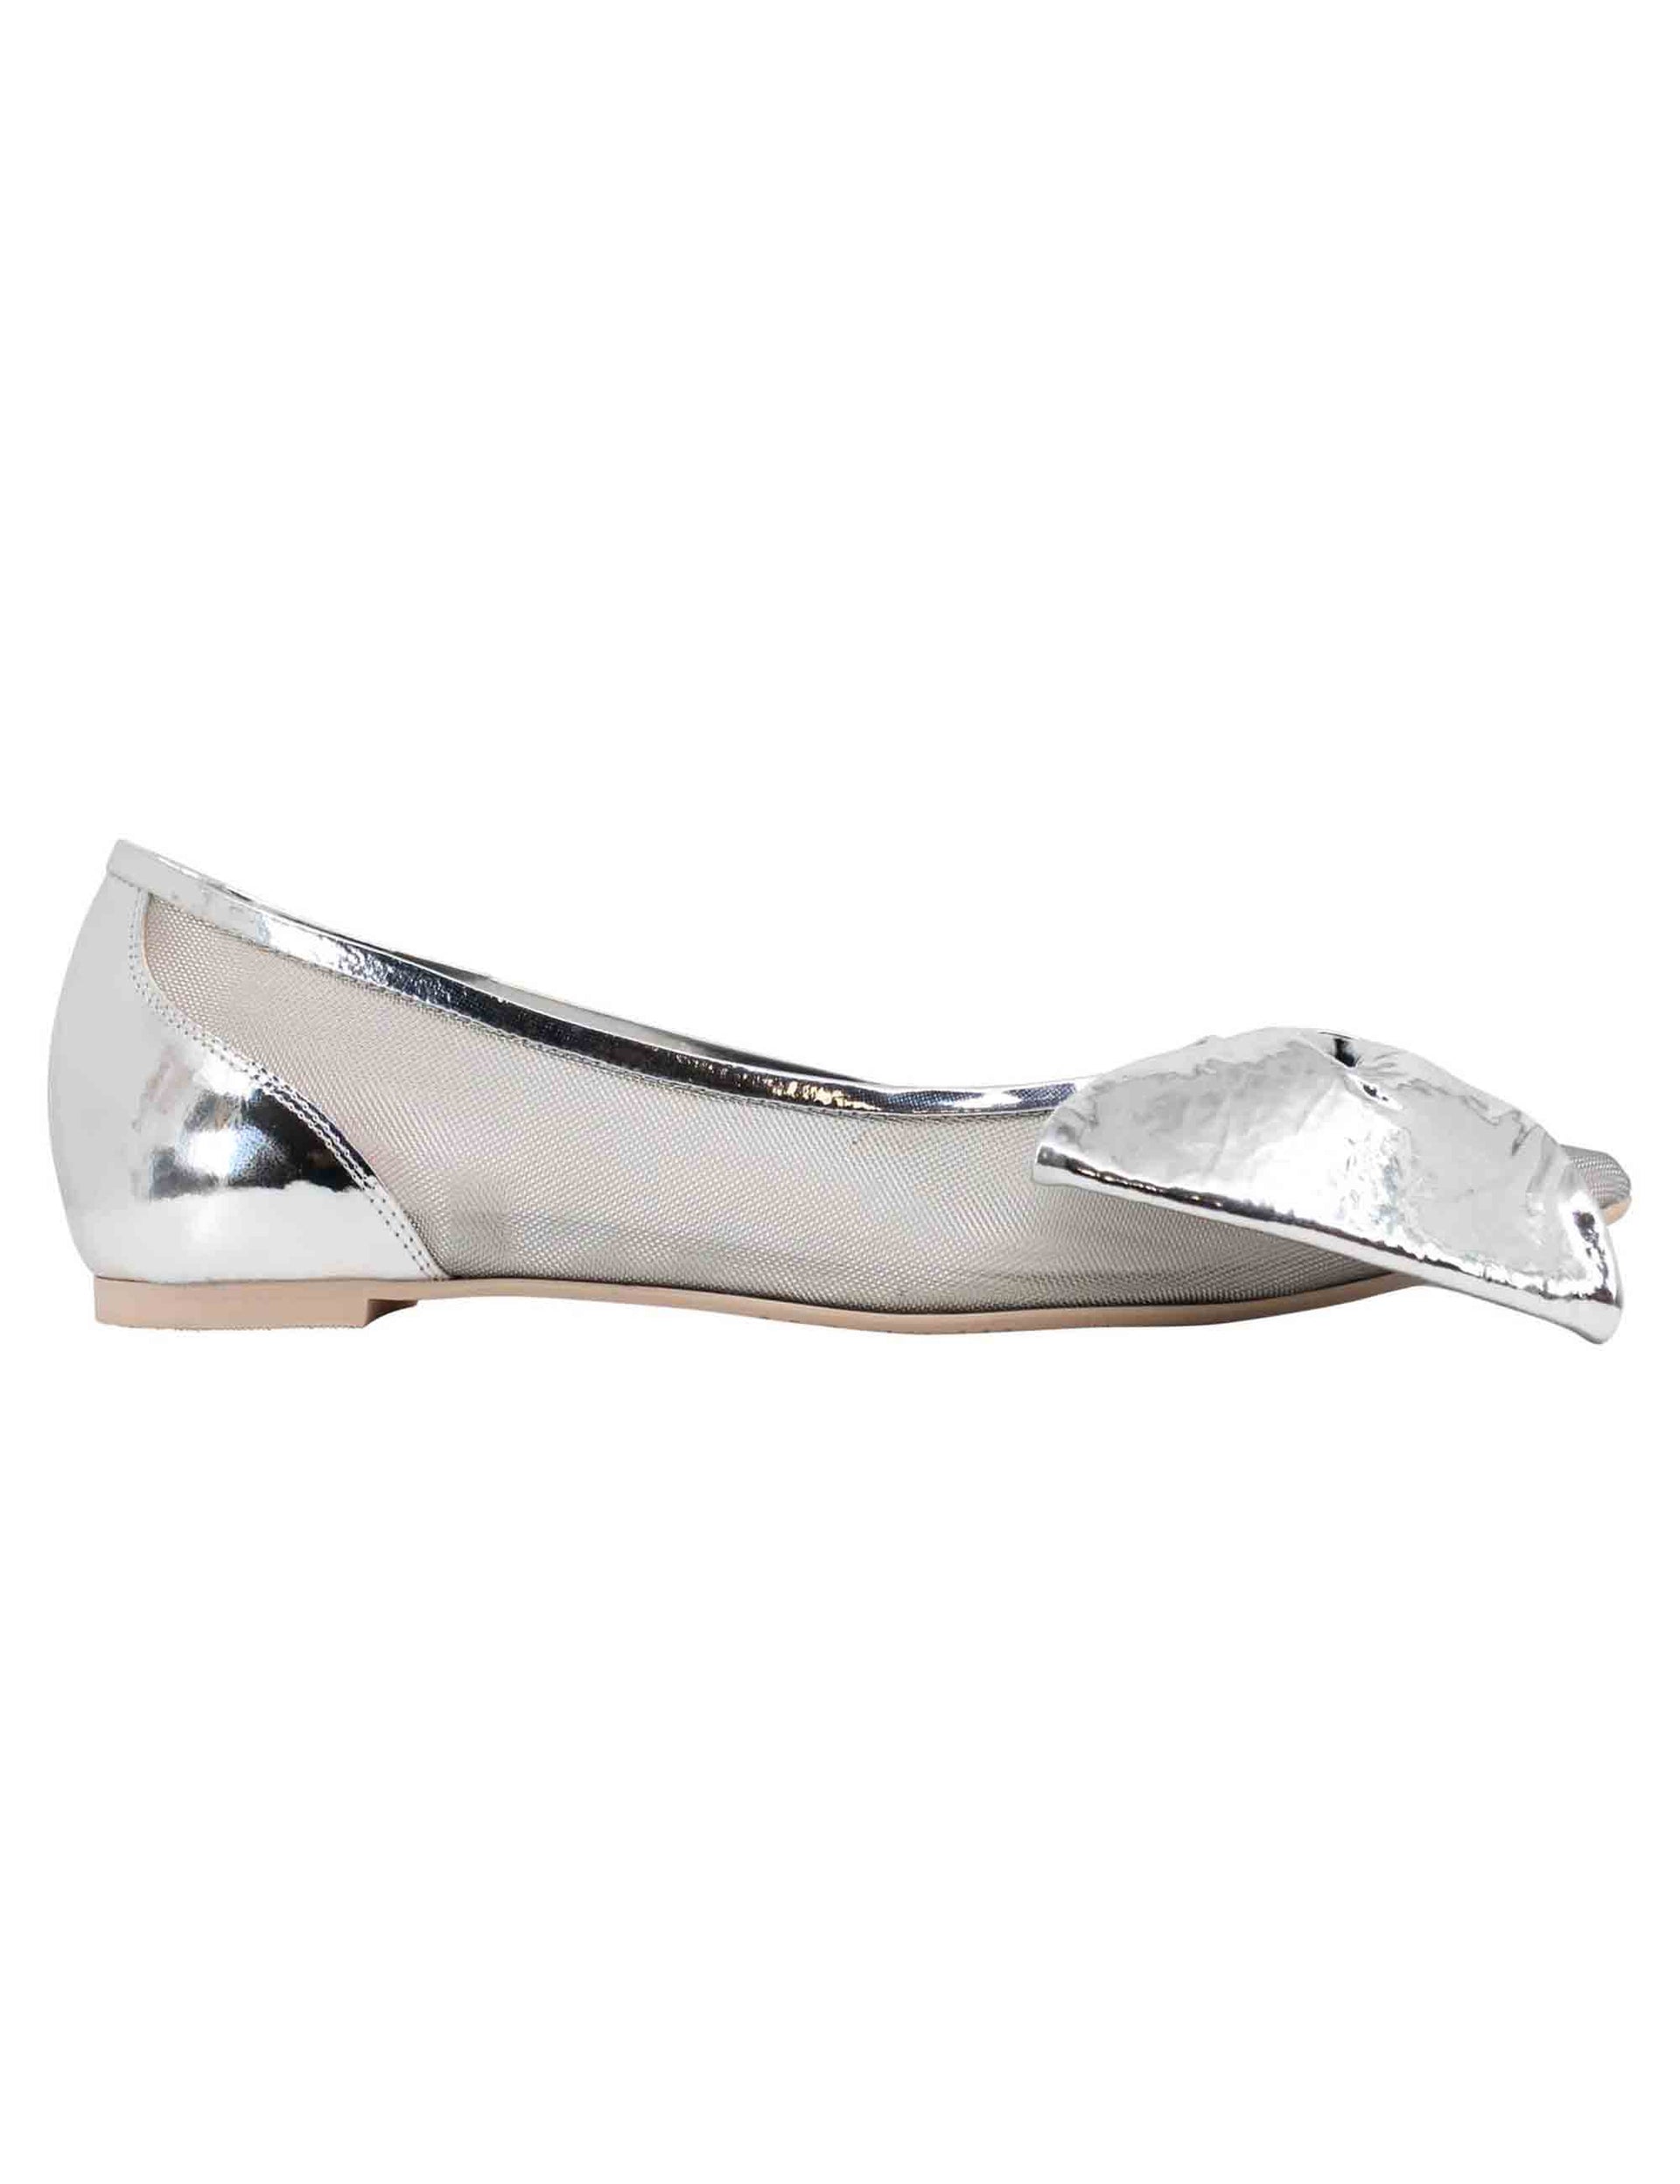 Women's silver leather ballet flats with pointed toe and bow